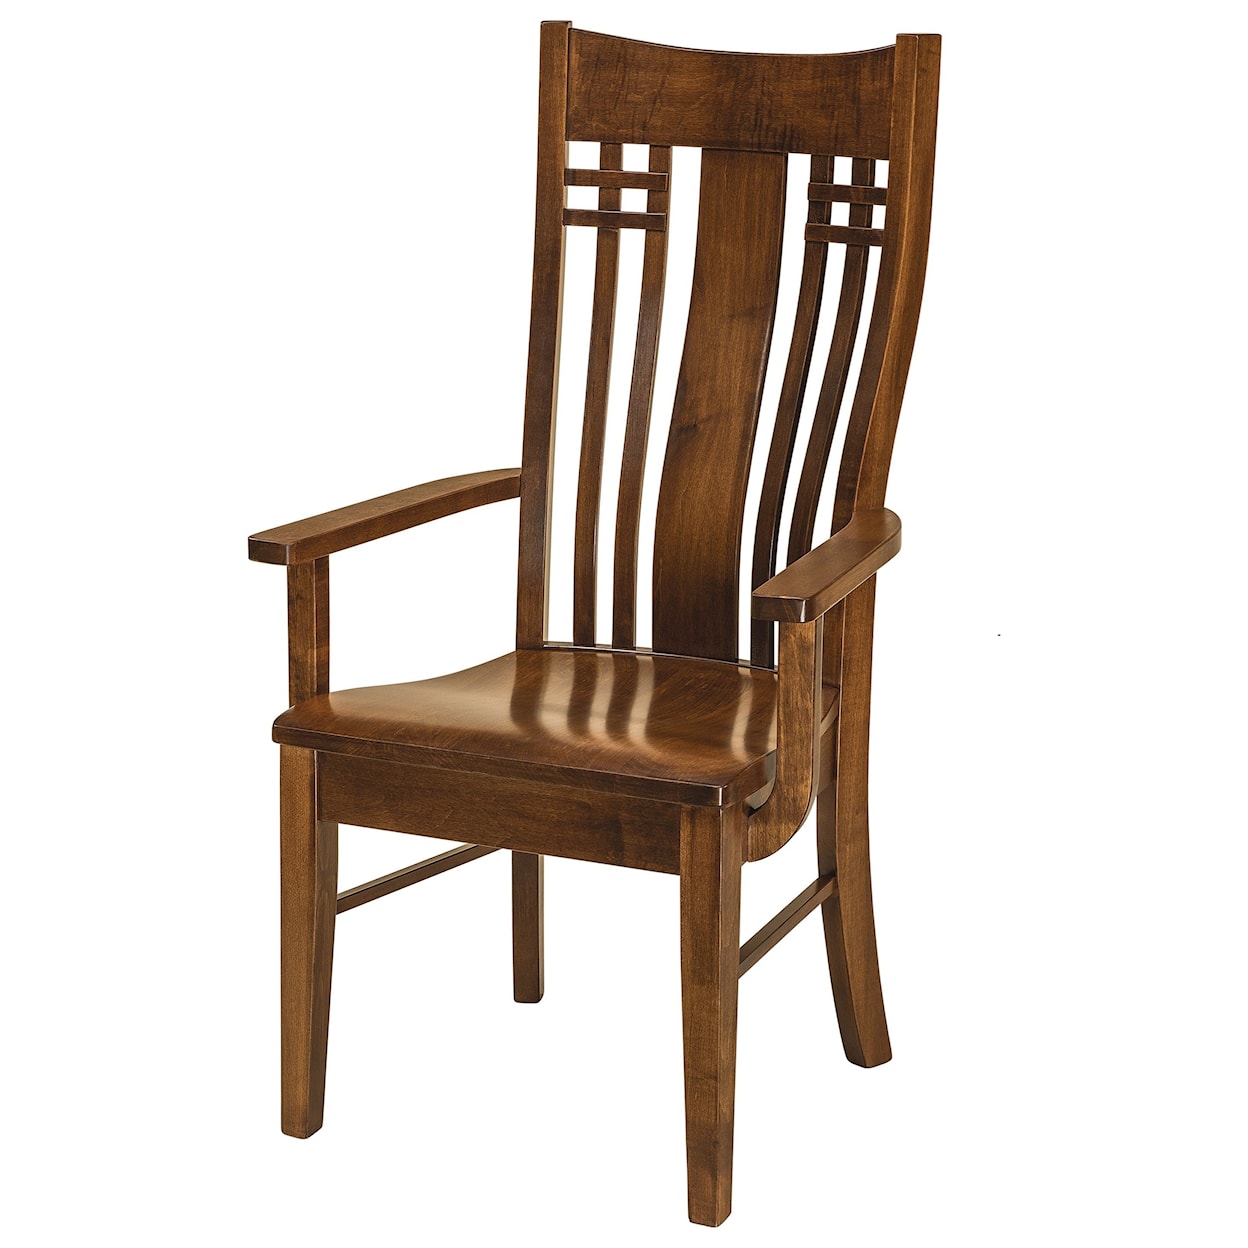 F&N Woodworking Bennet Arm Chair - Leather Seat